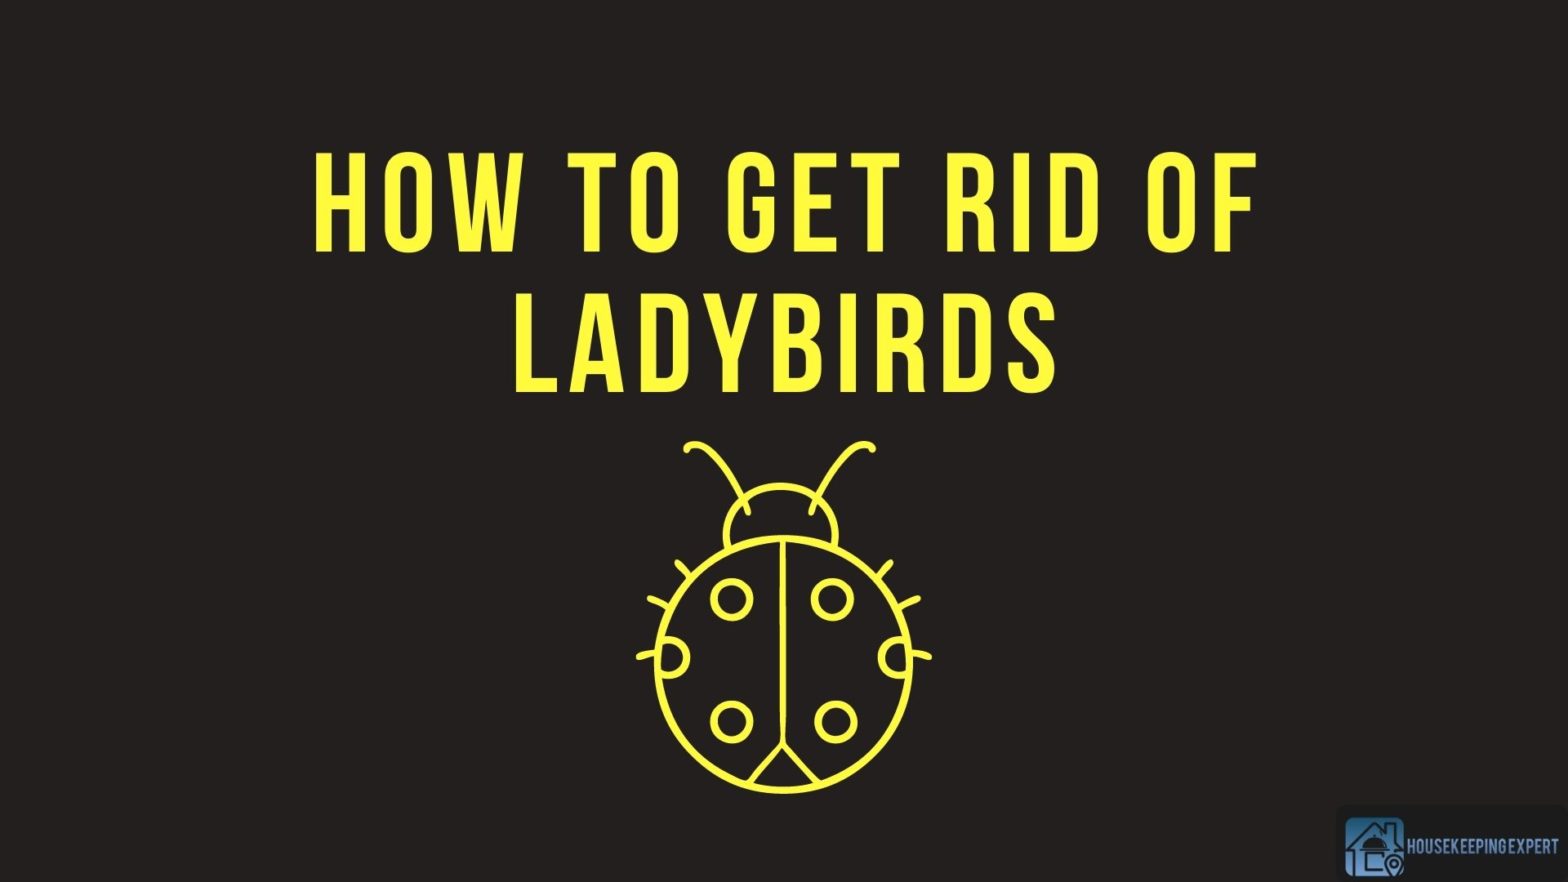 How To Get Rid Of Ladybirds